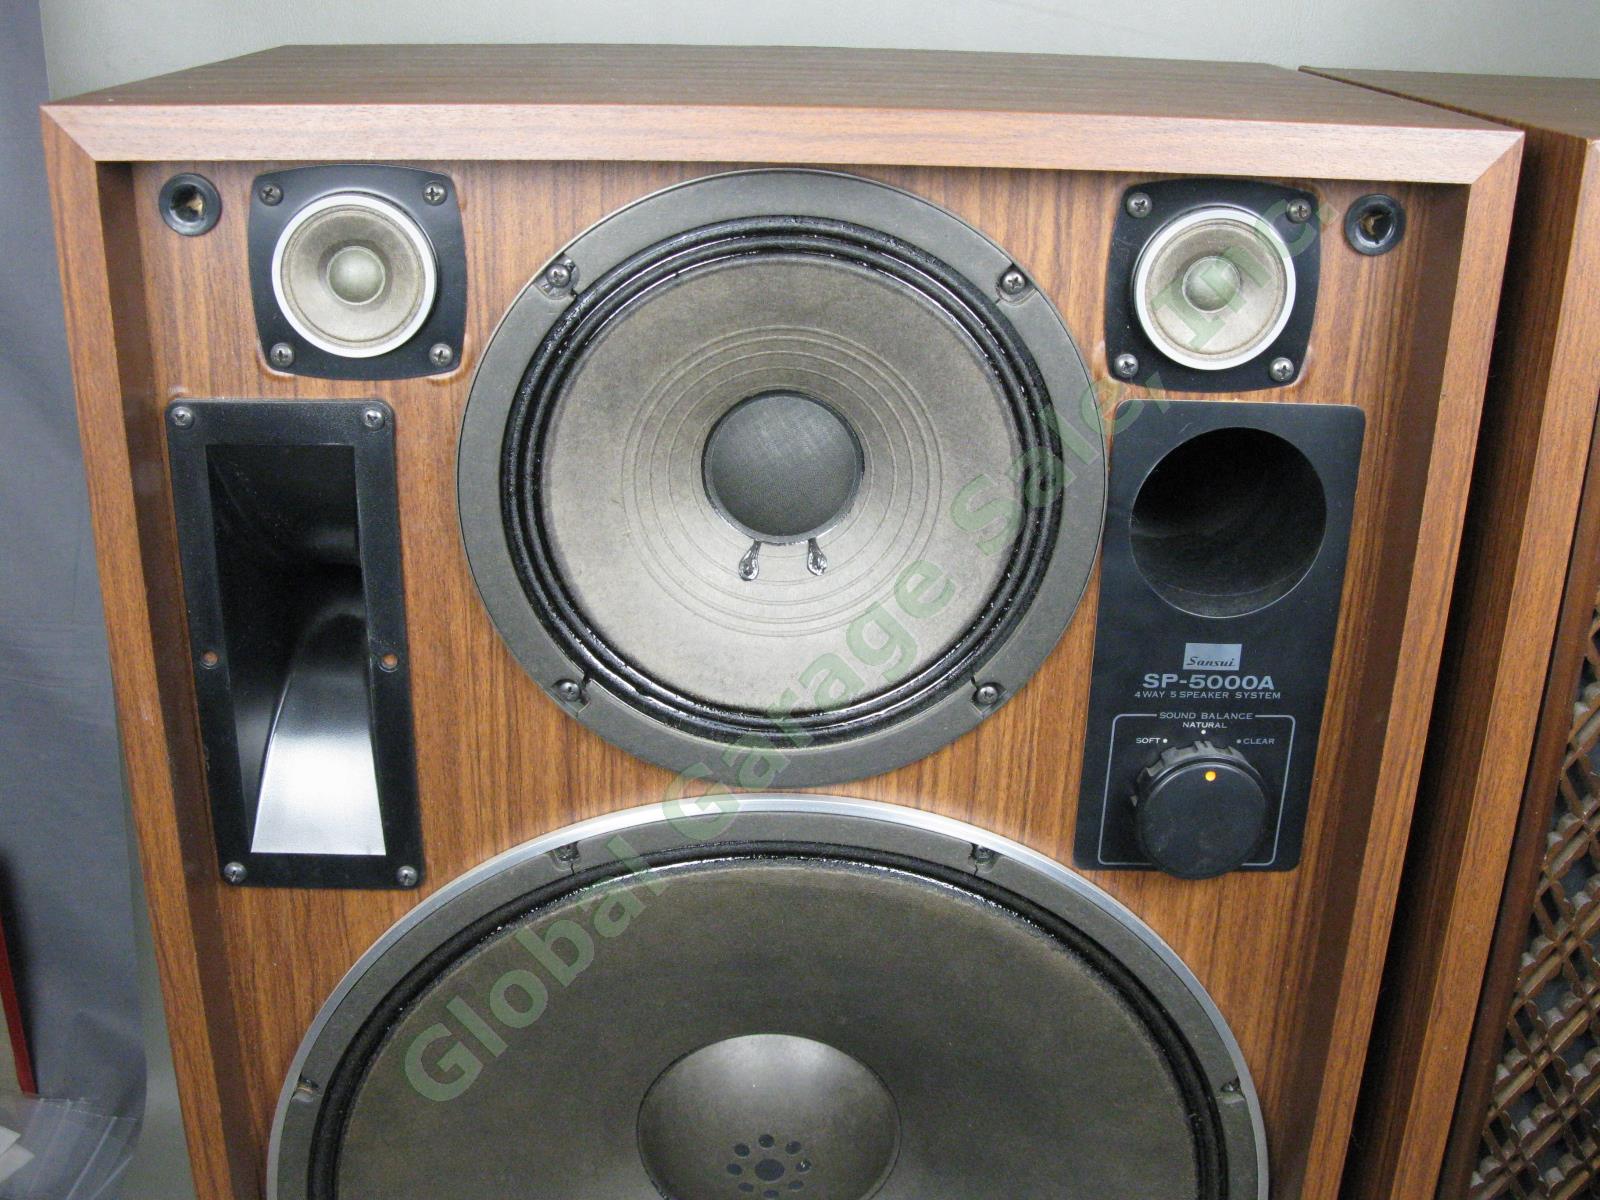 Rare Vintage 1970s Sansui SP5000A Stereo Speakers 130W 16" Woofers One Owner! 5